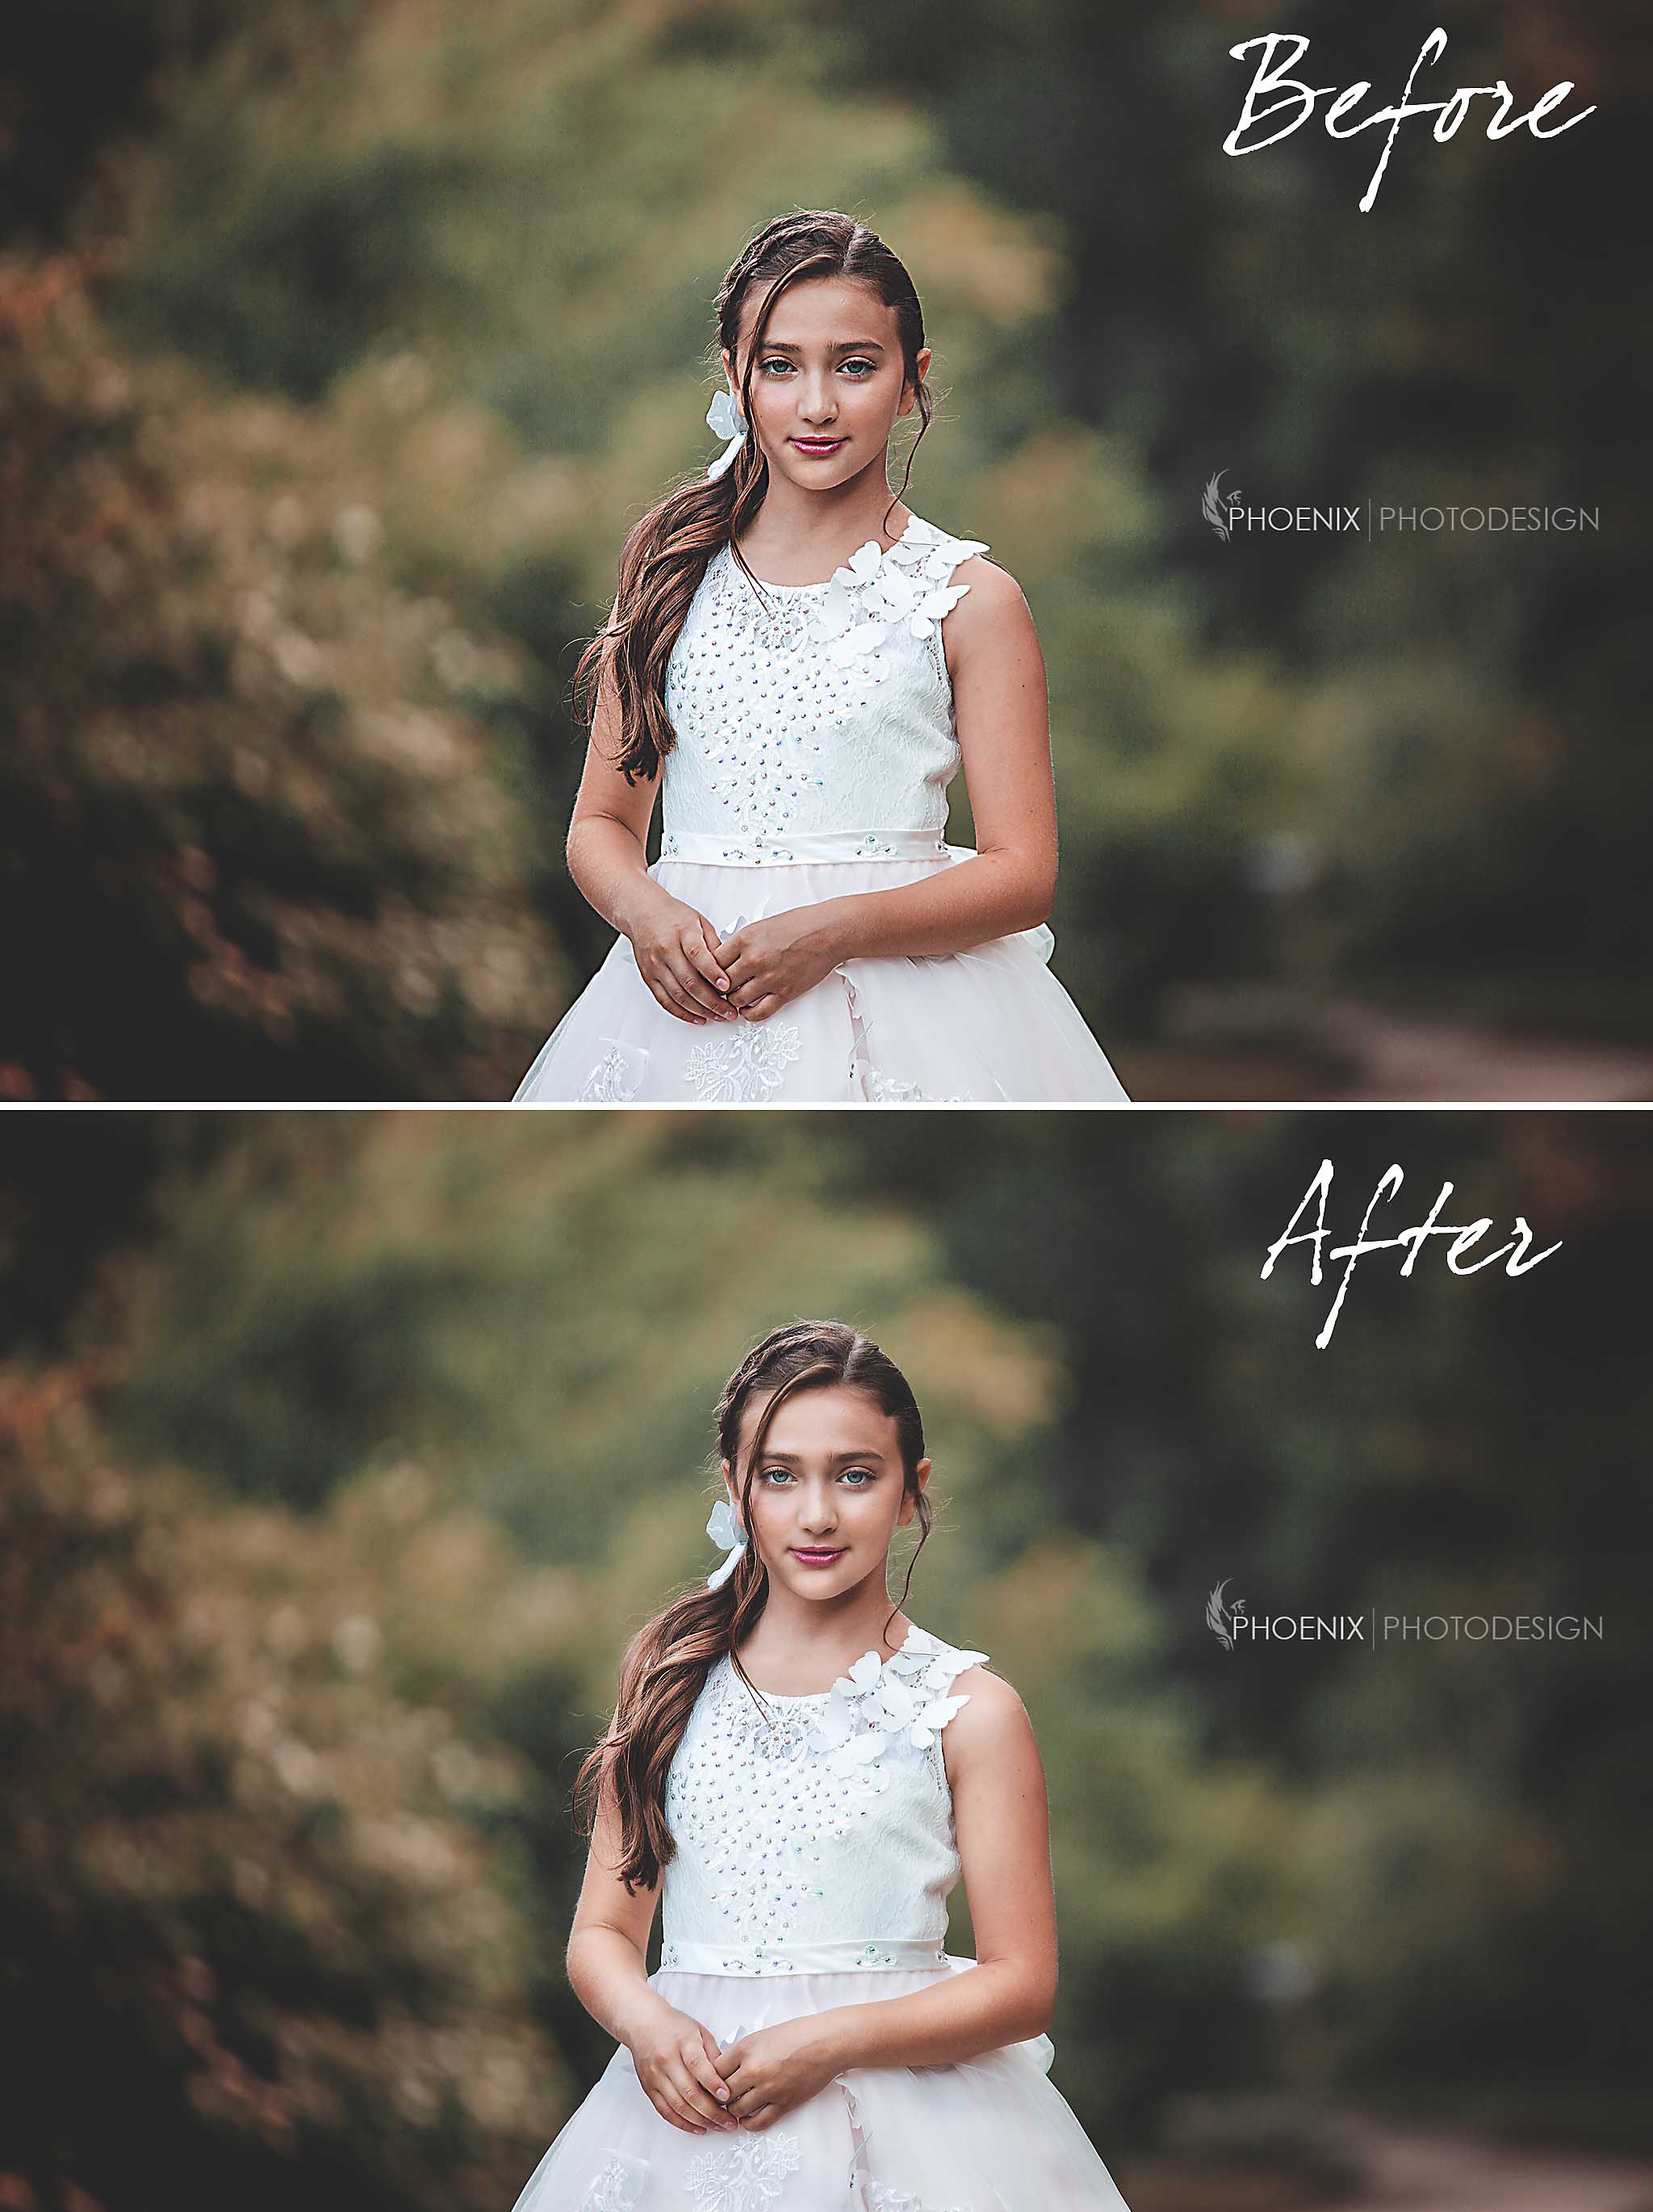 Learn easily How to dodge and burn photos in editing